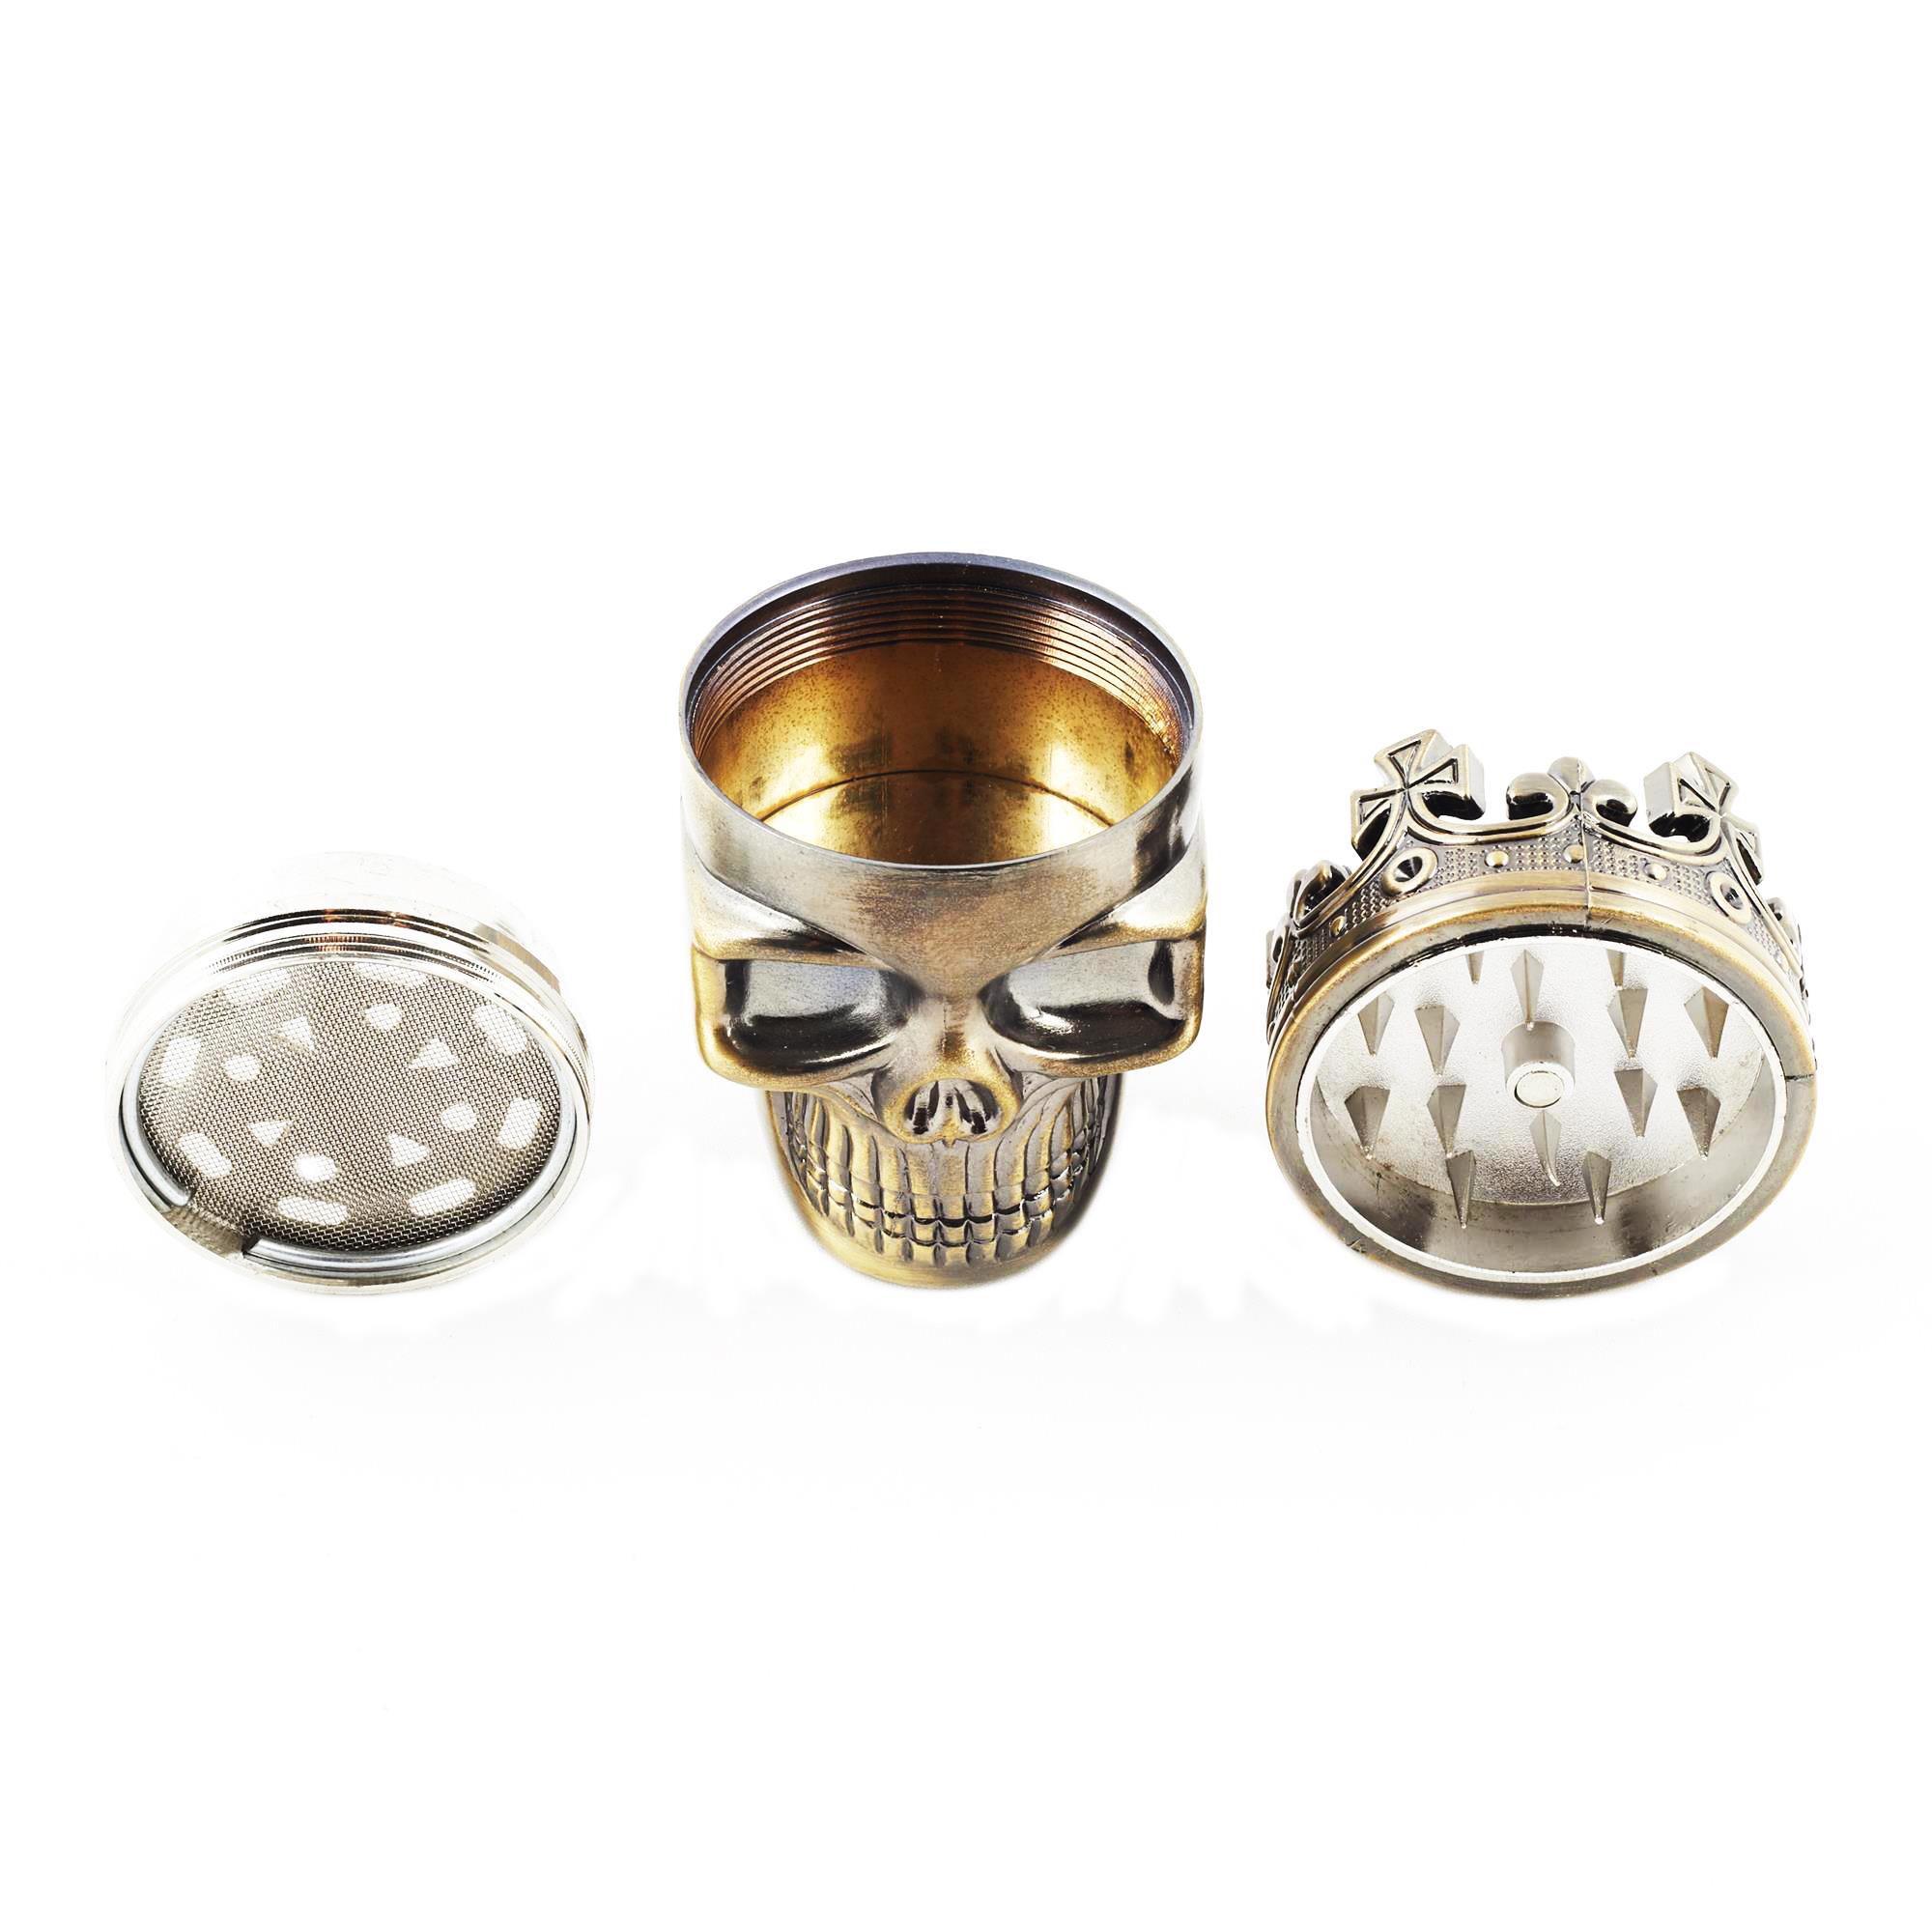 Color Bronze by DELIAWINTERFEL Crowned King| for Spice Spices Grinder in The Shape of a Skull Coffee Herbs